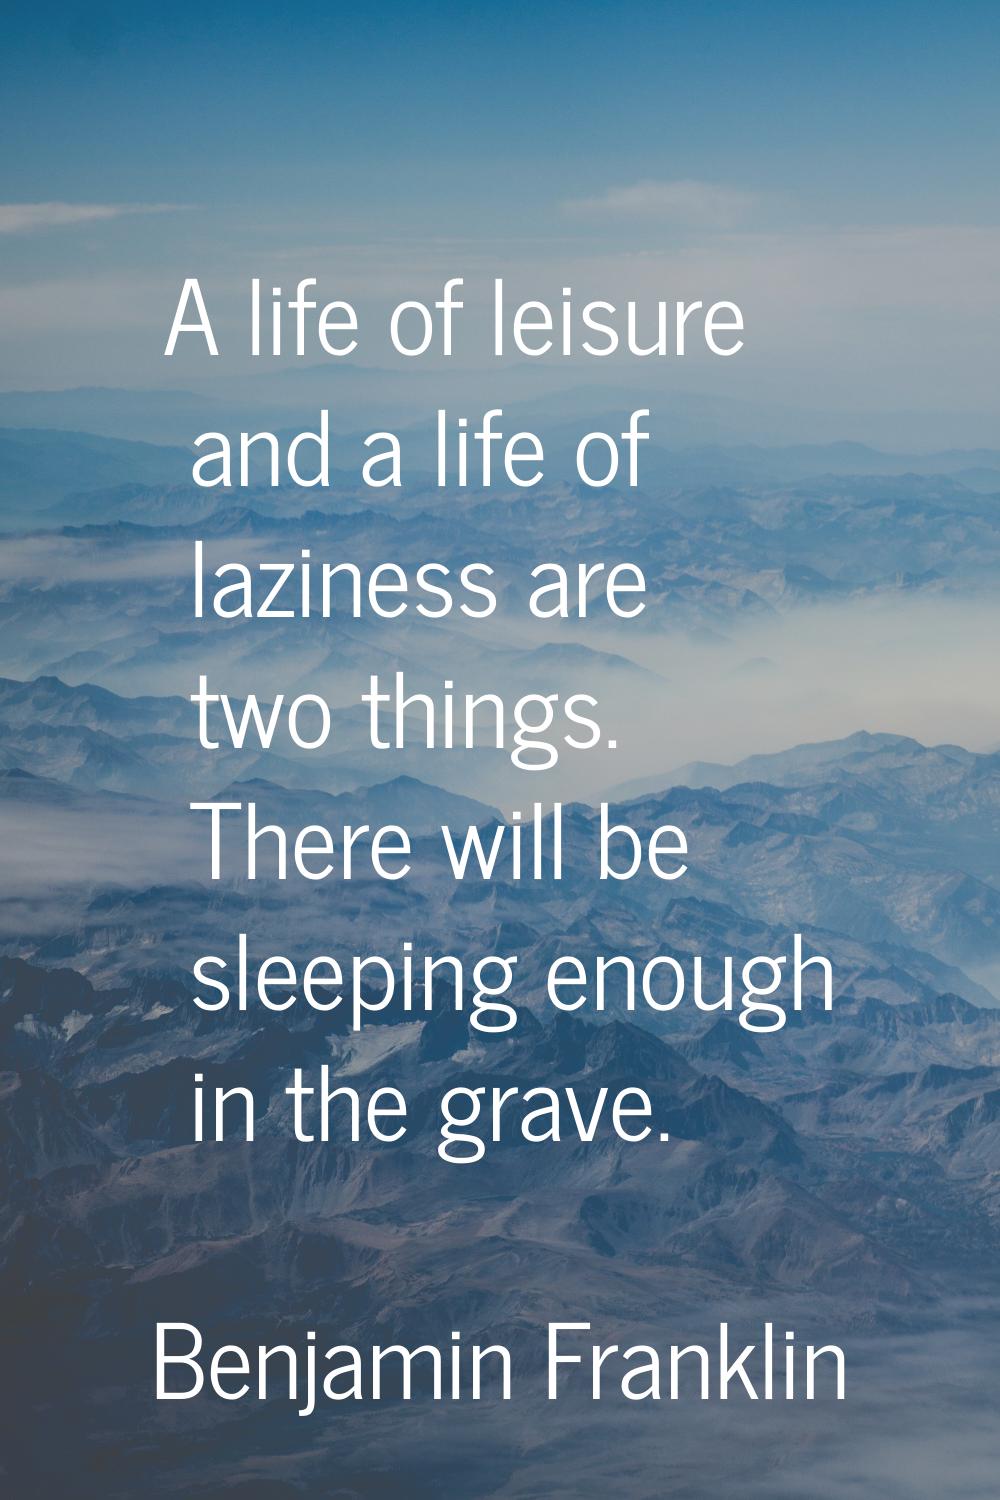 A life of leisure and a life of laziness are two things. There will be sleeping enough in the grave